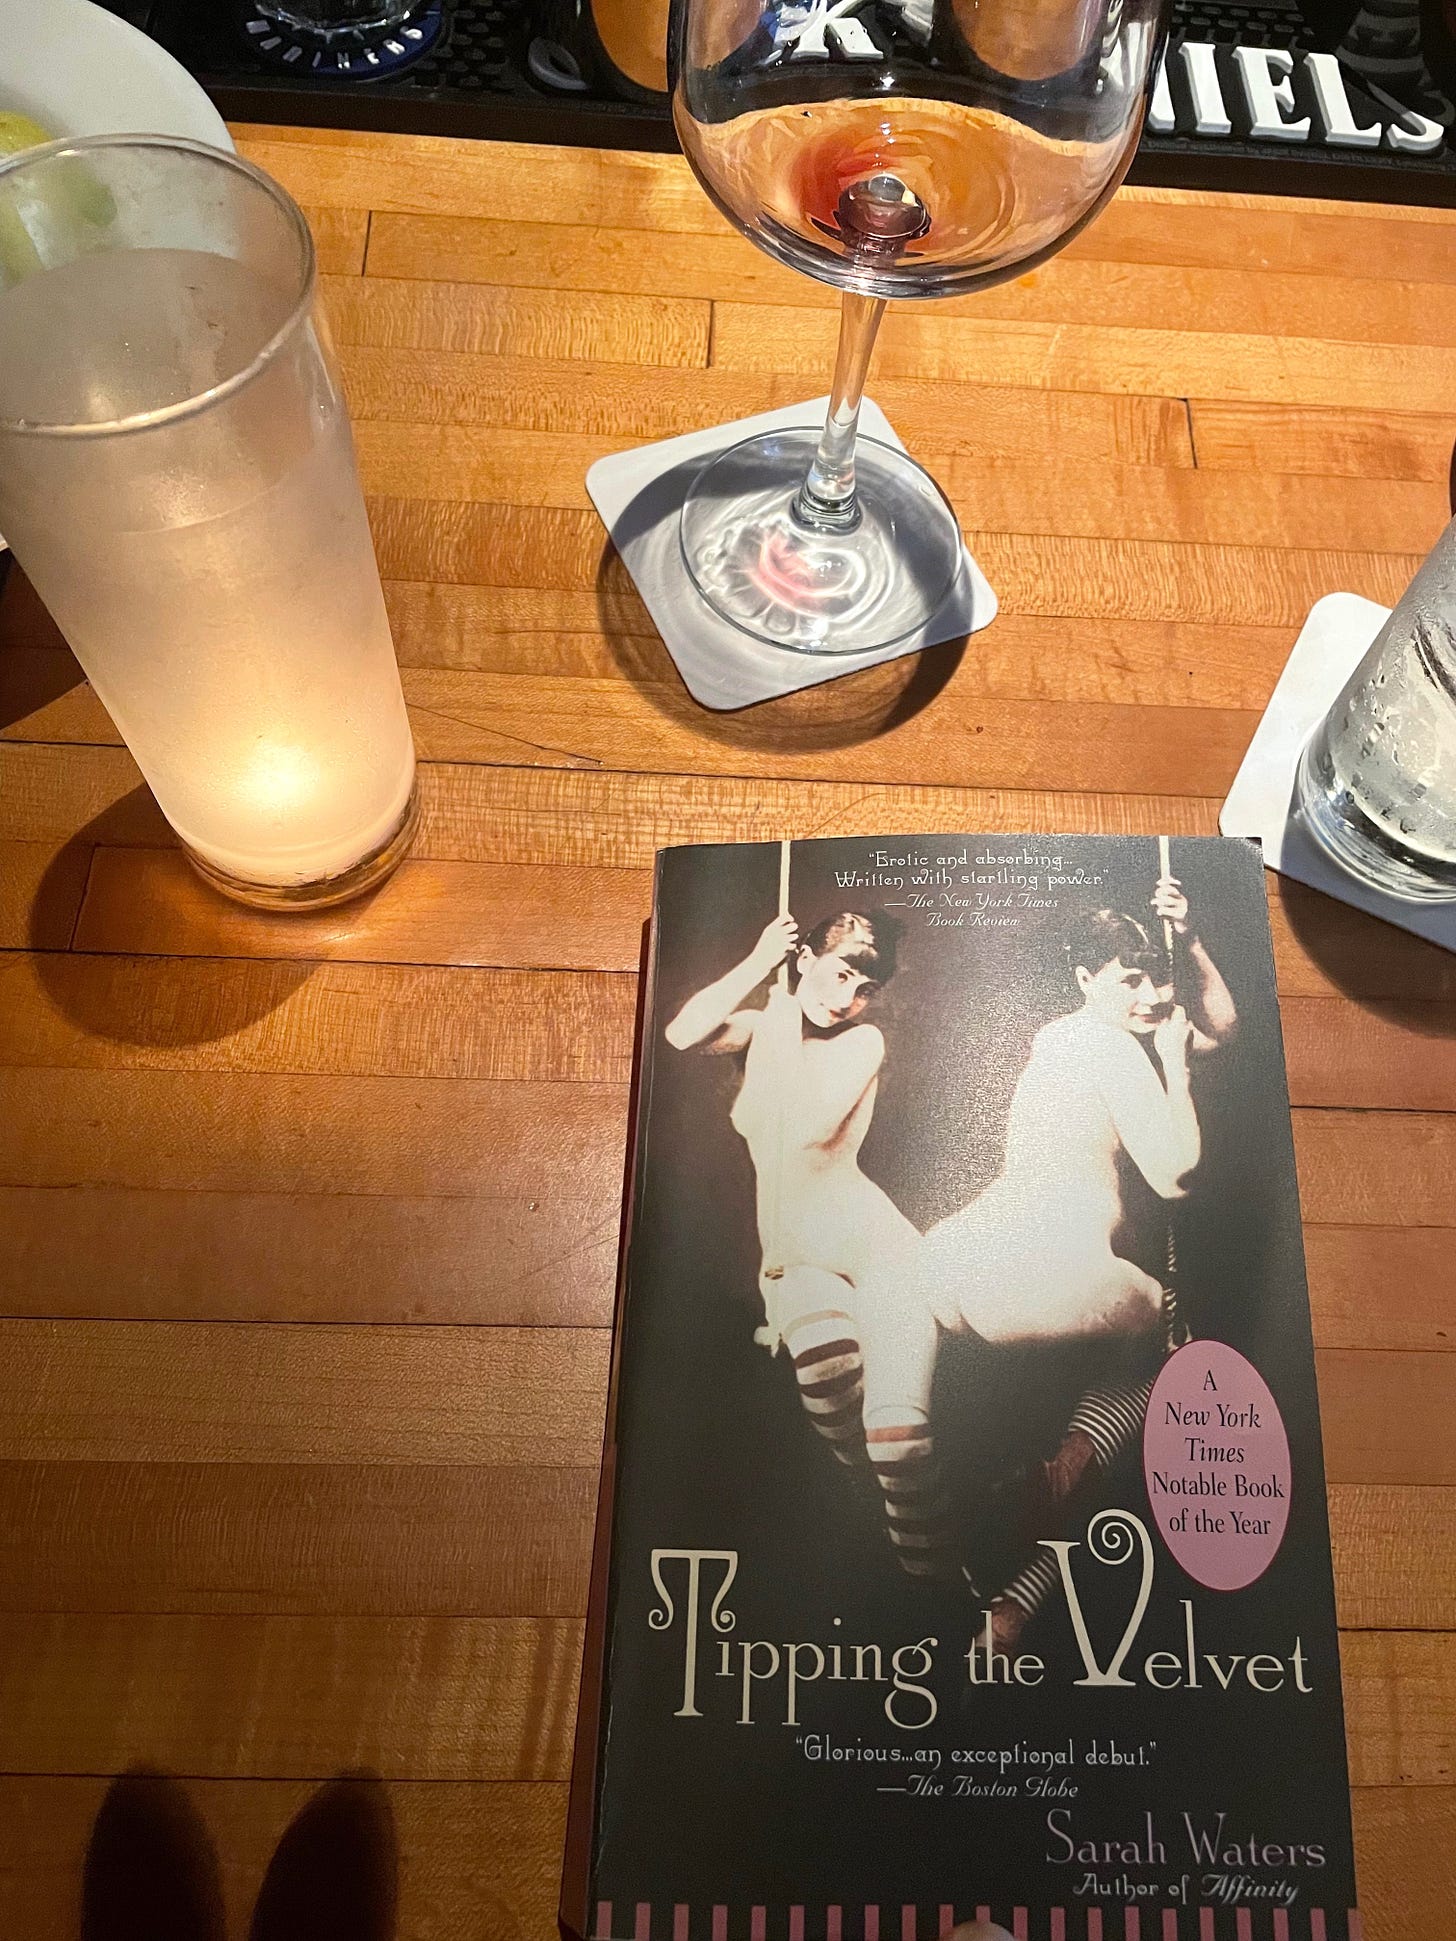 image of book "tipping the velvet" next to empty wine glass, water glass, and a candle